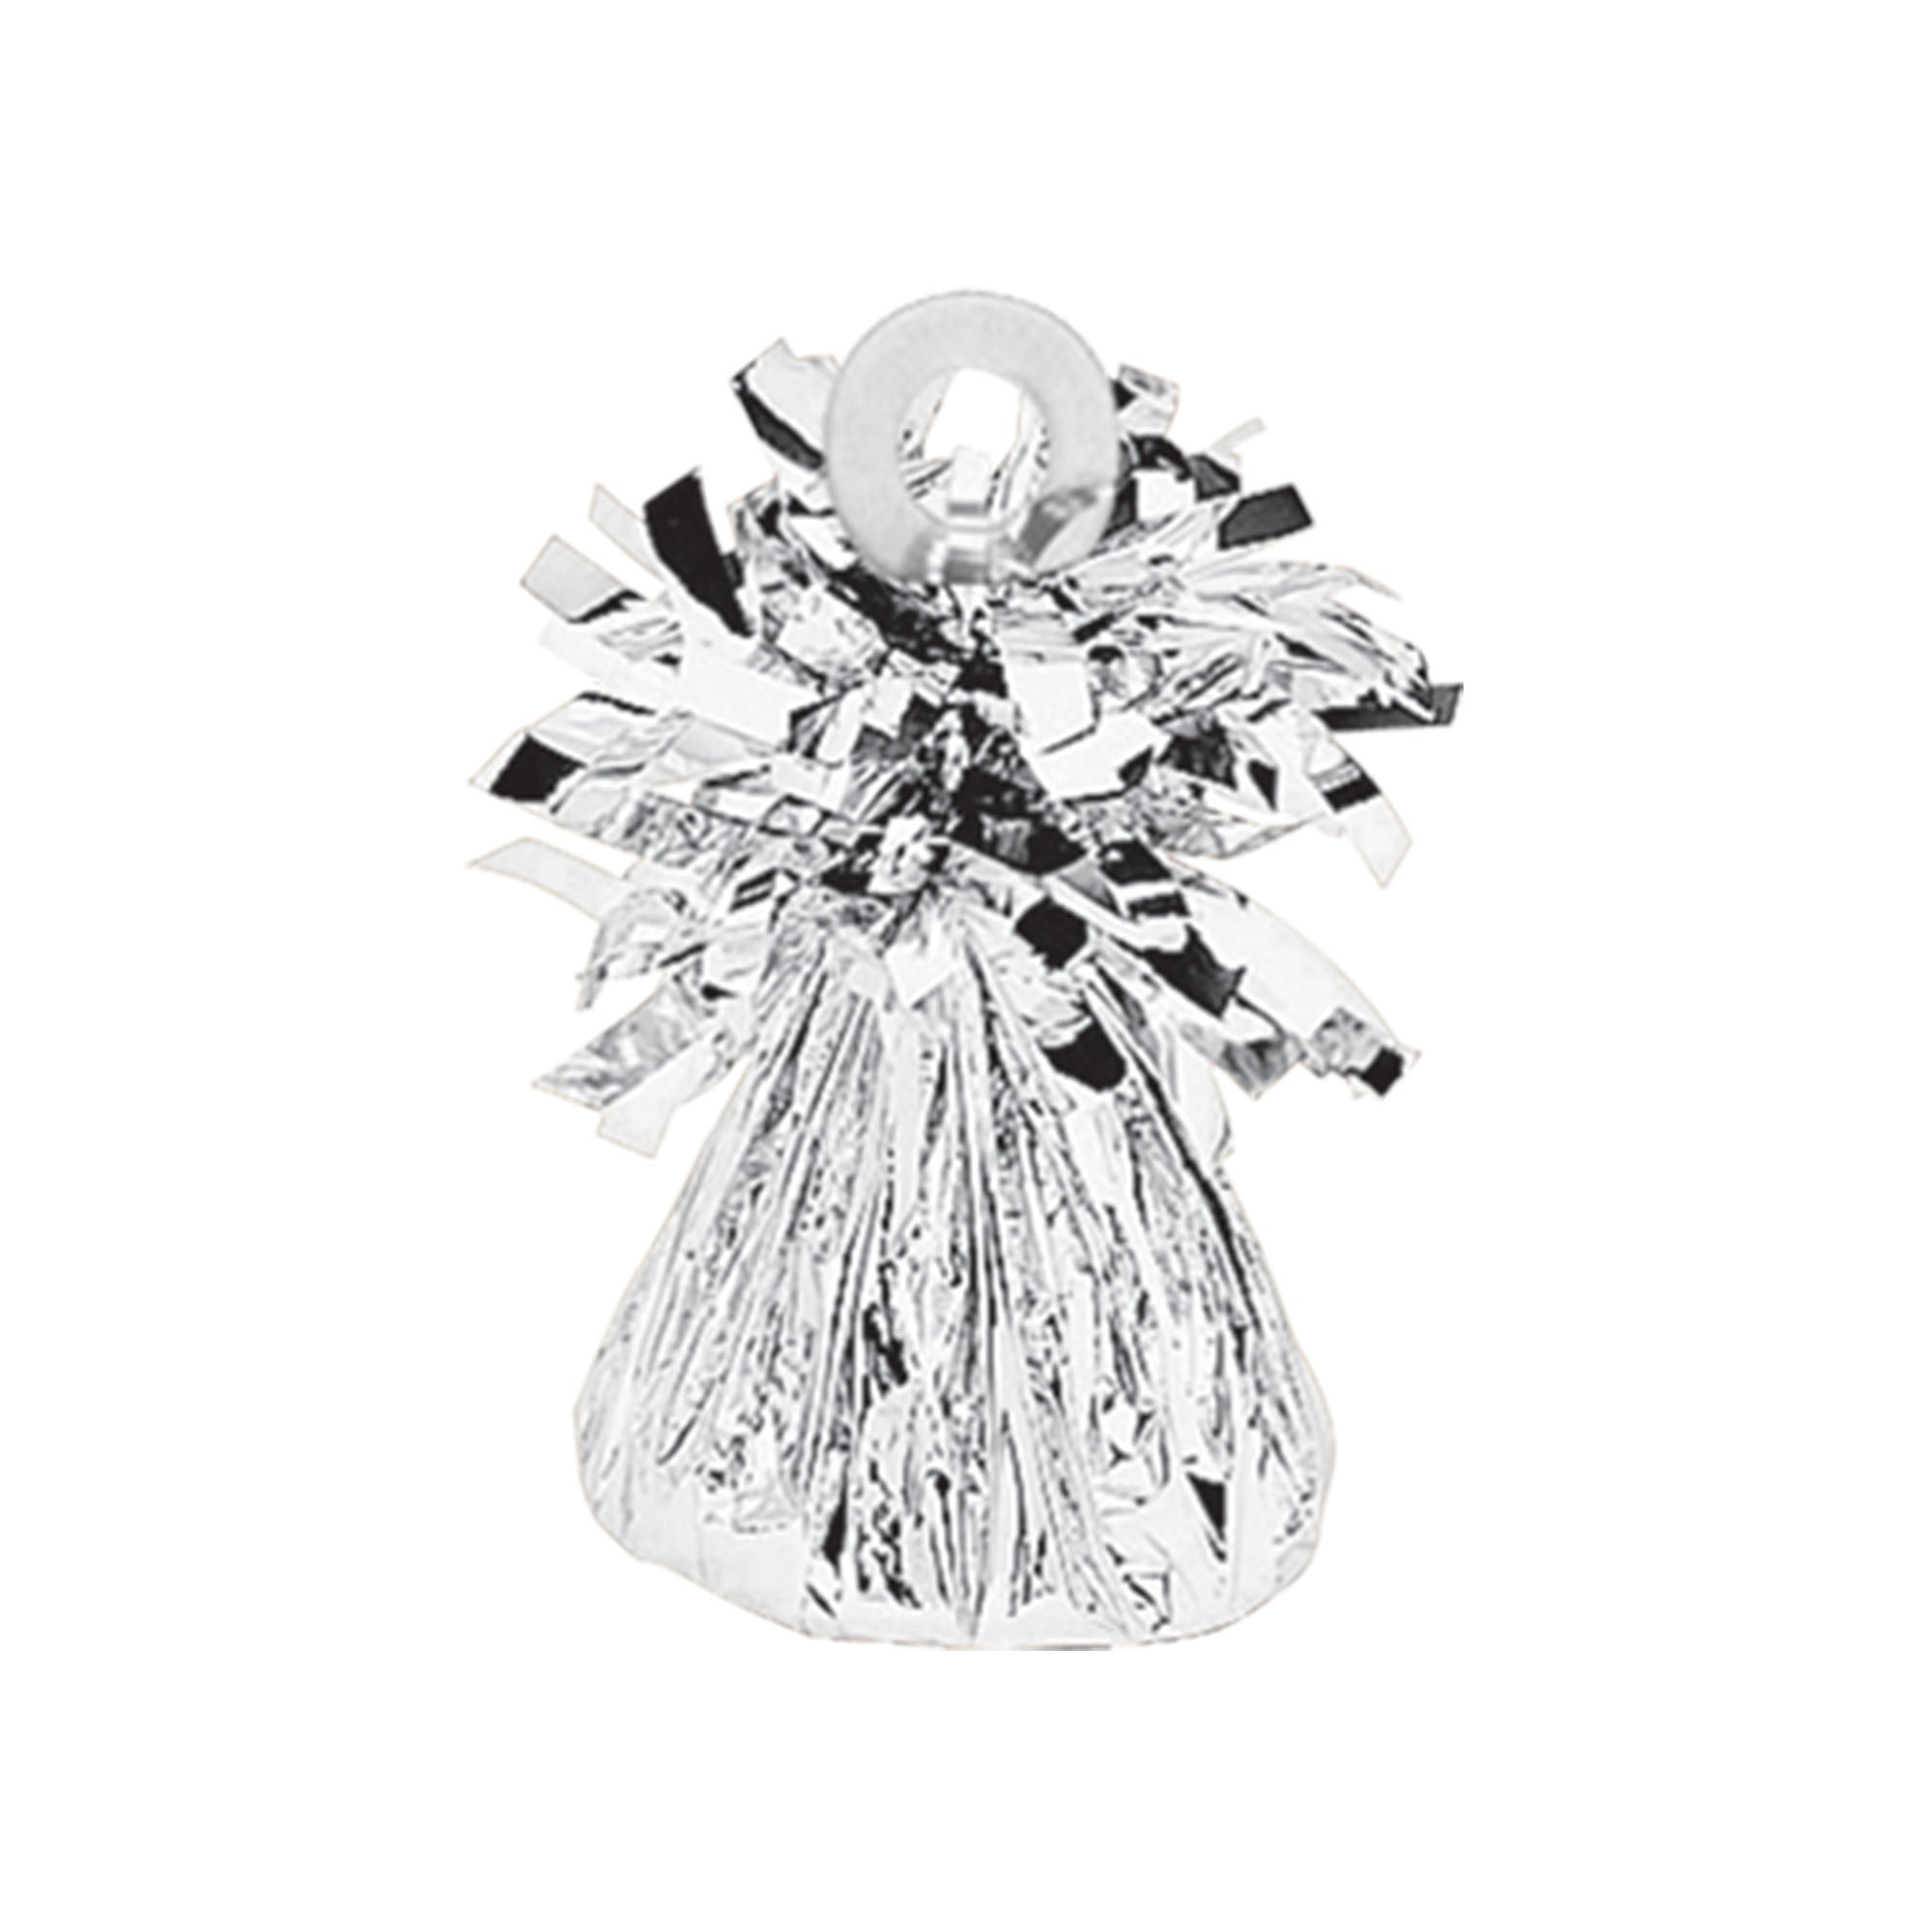 Small Foil Balloon Weight  Silver